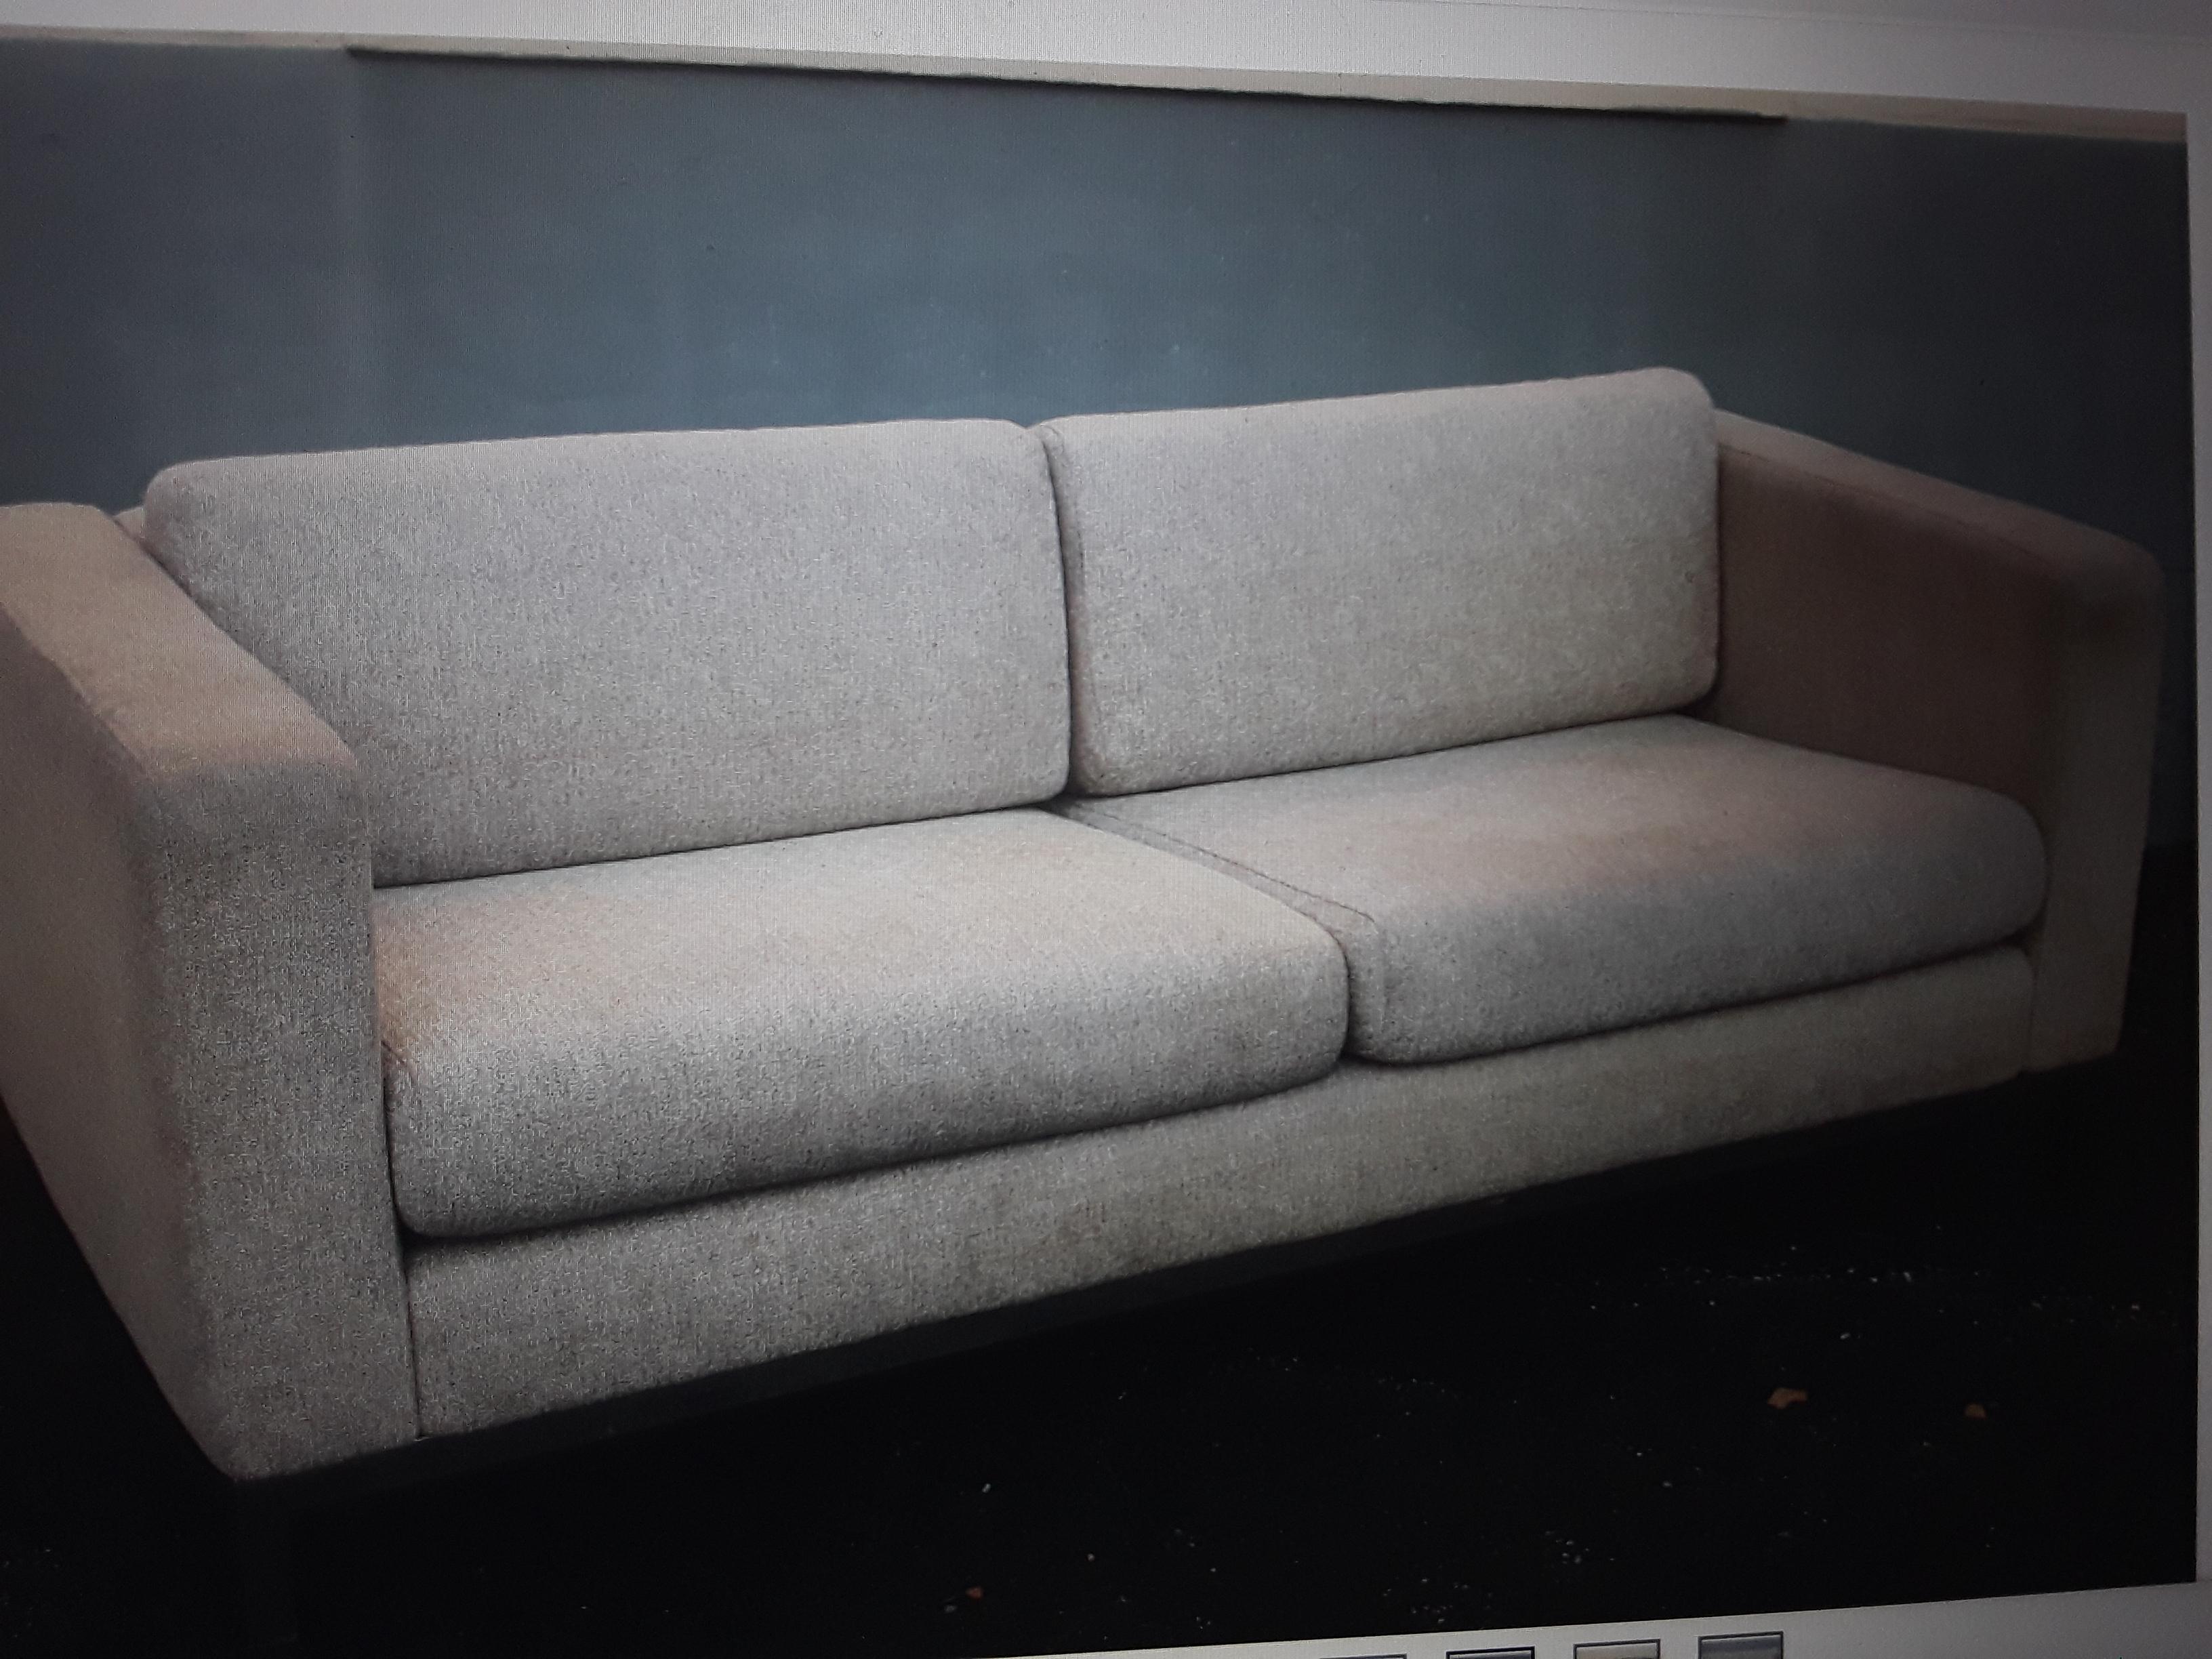 Vintage 1970's Ultra Modern 4 Seater Sofa/ Daybed In Good Condition For Sale In Opa Locka, FL